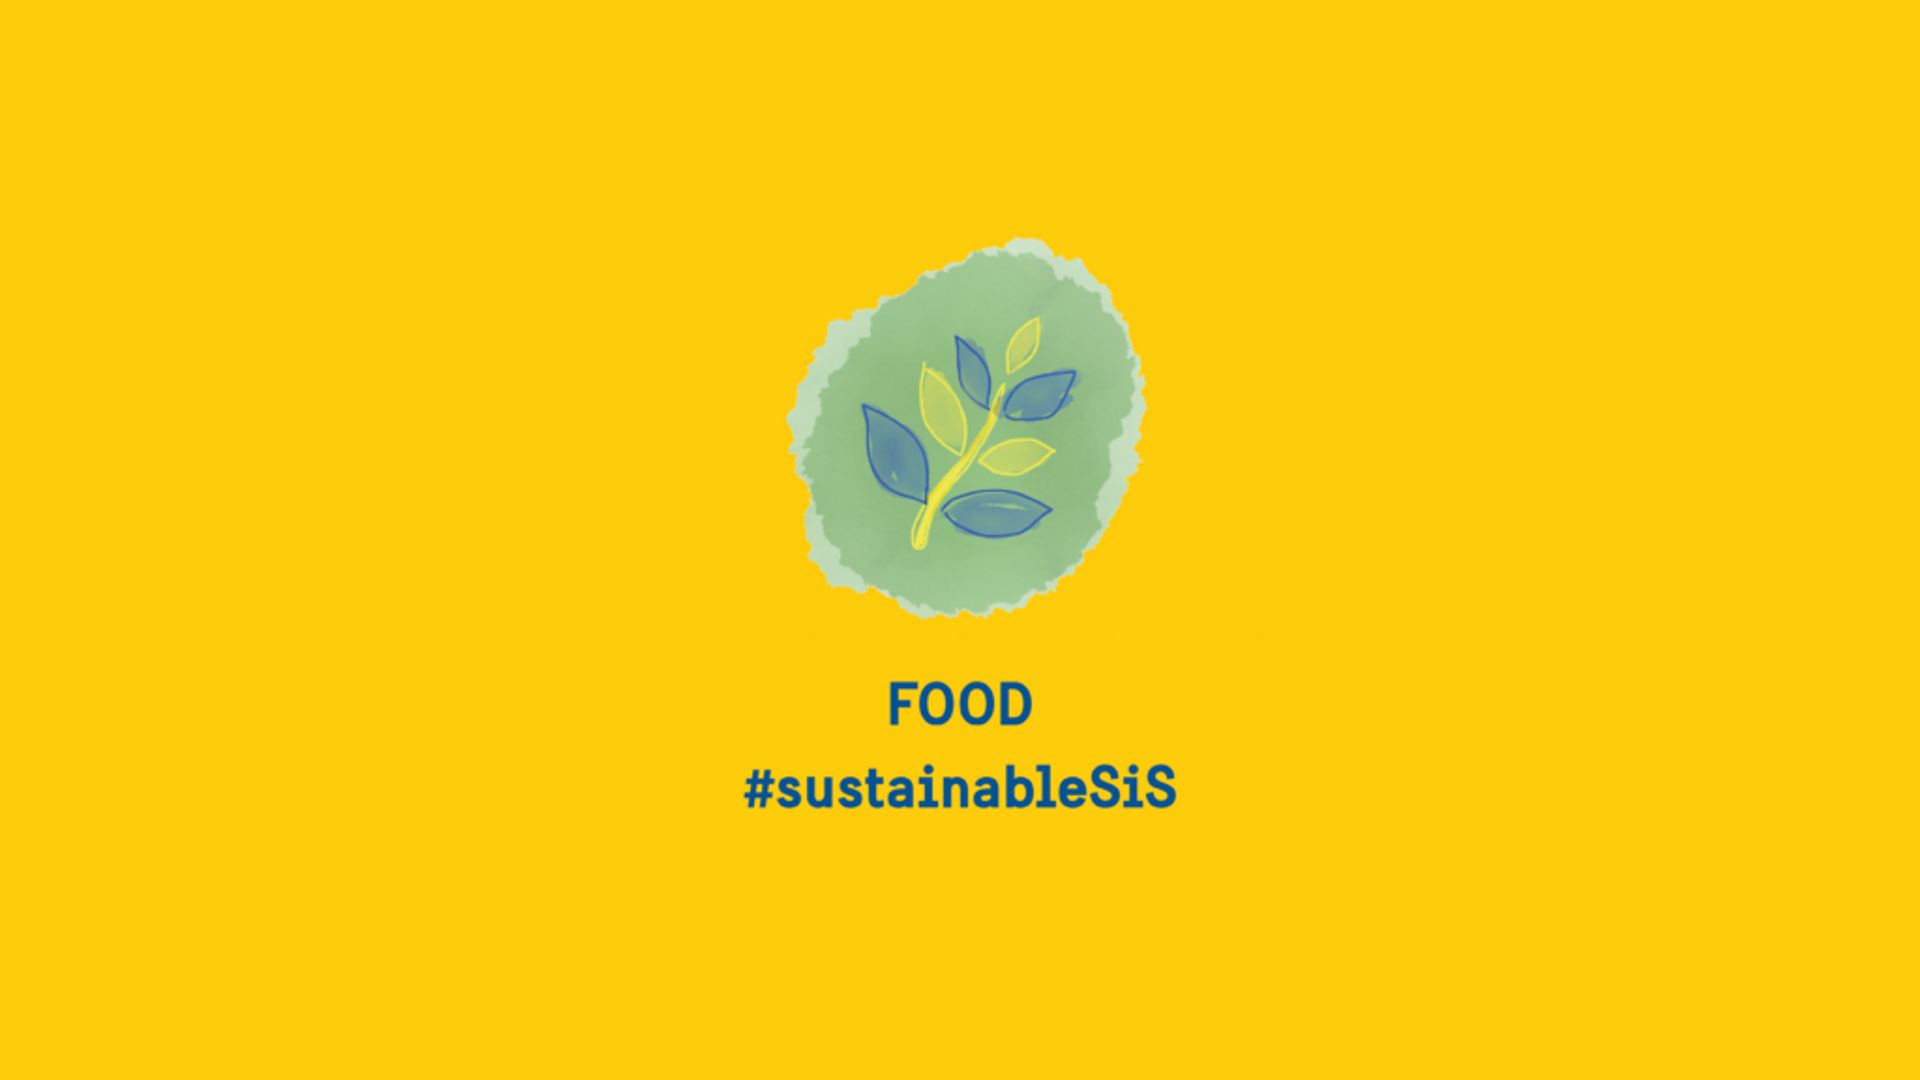 A flower in blue and yellow with a text saying "food" and underneath it is a hashtag saying sustainableSiS. The background is all yellow.